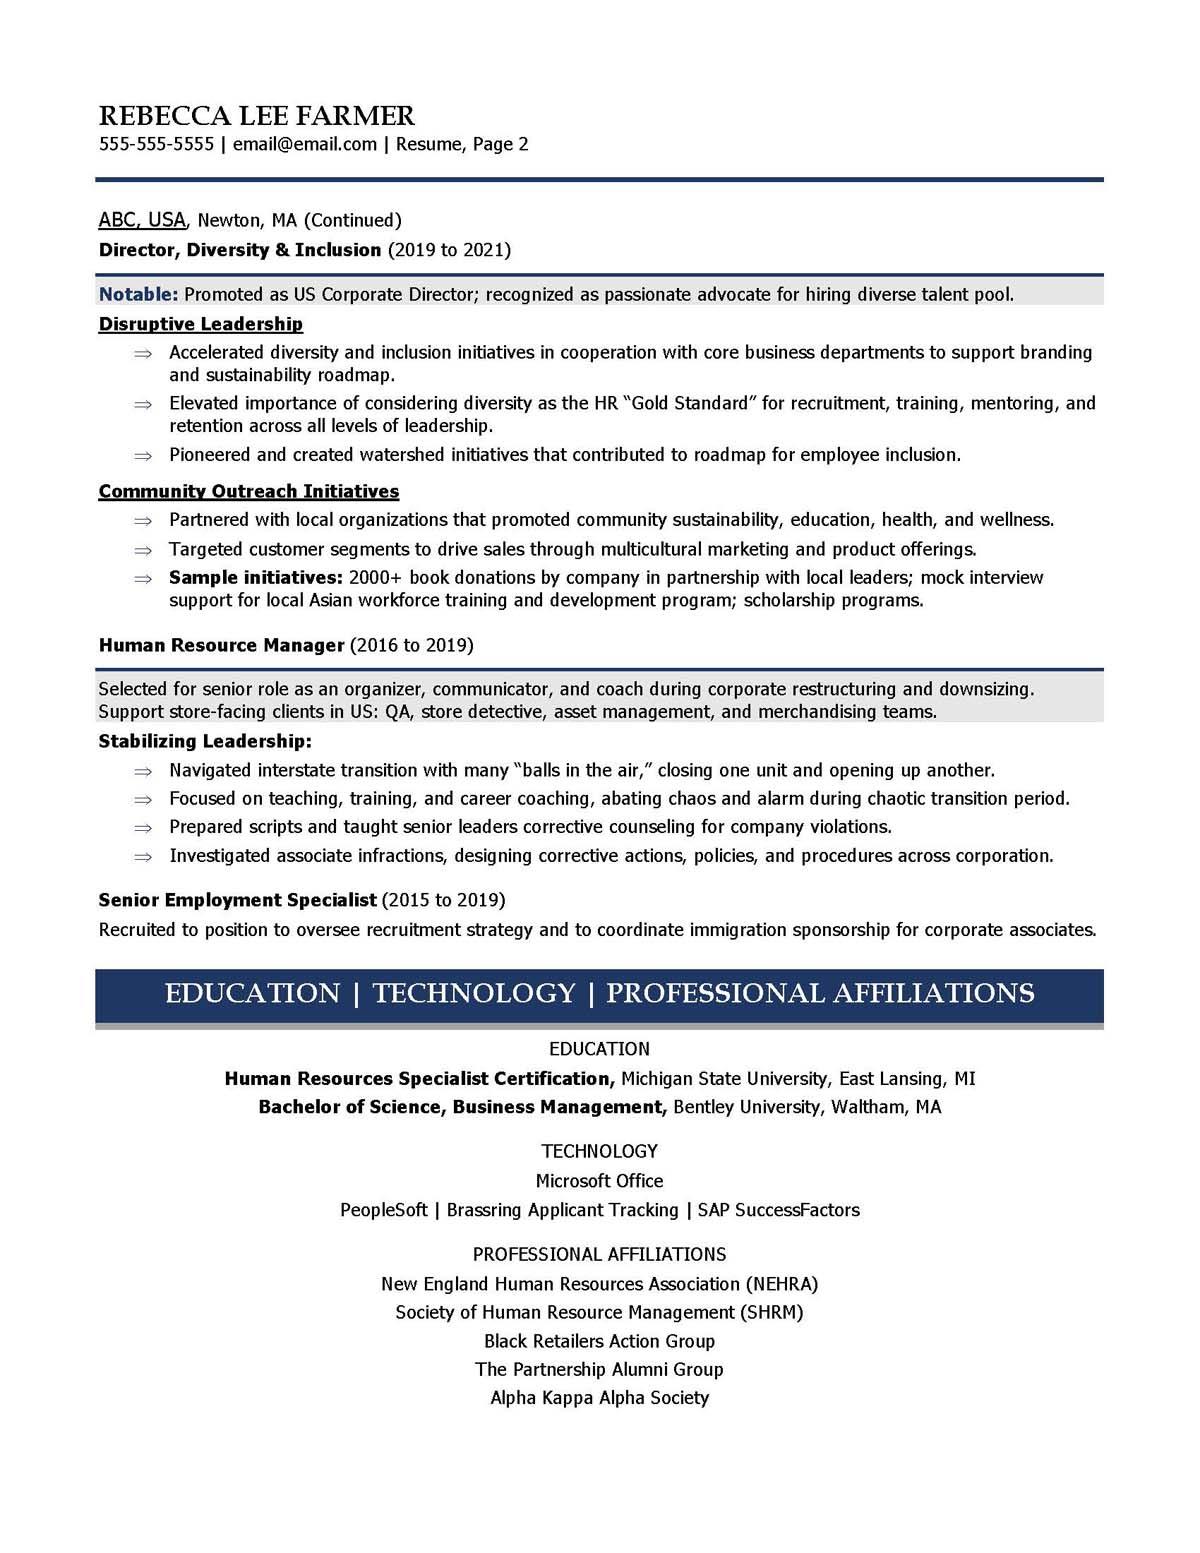 Sample resume: Human Resources, Low Experience, Chronological